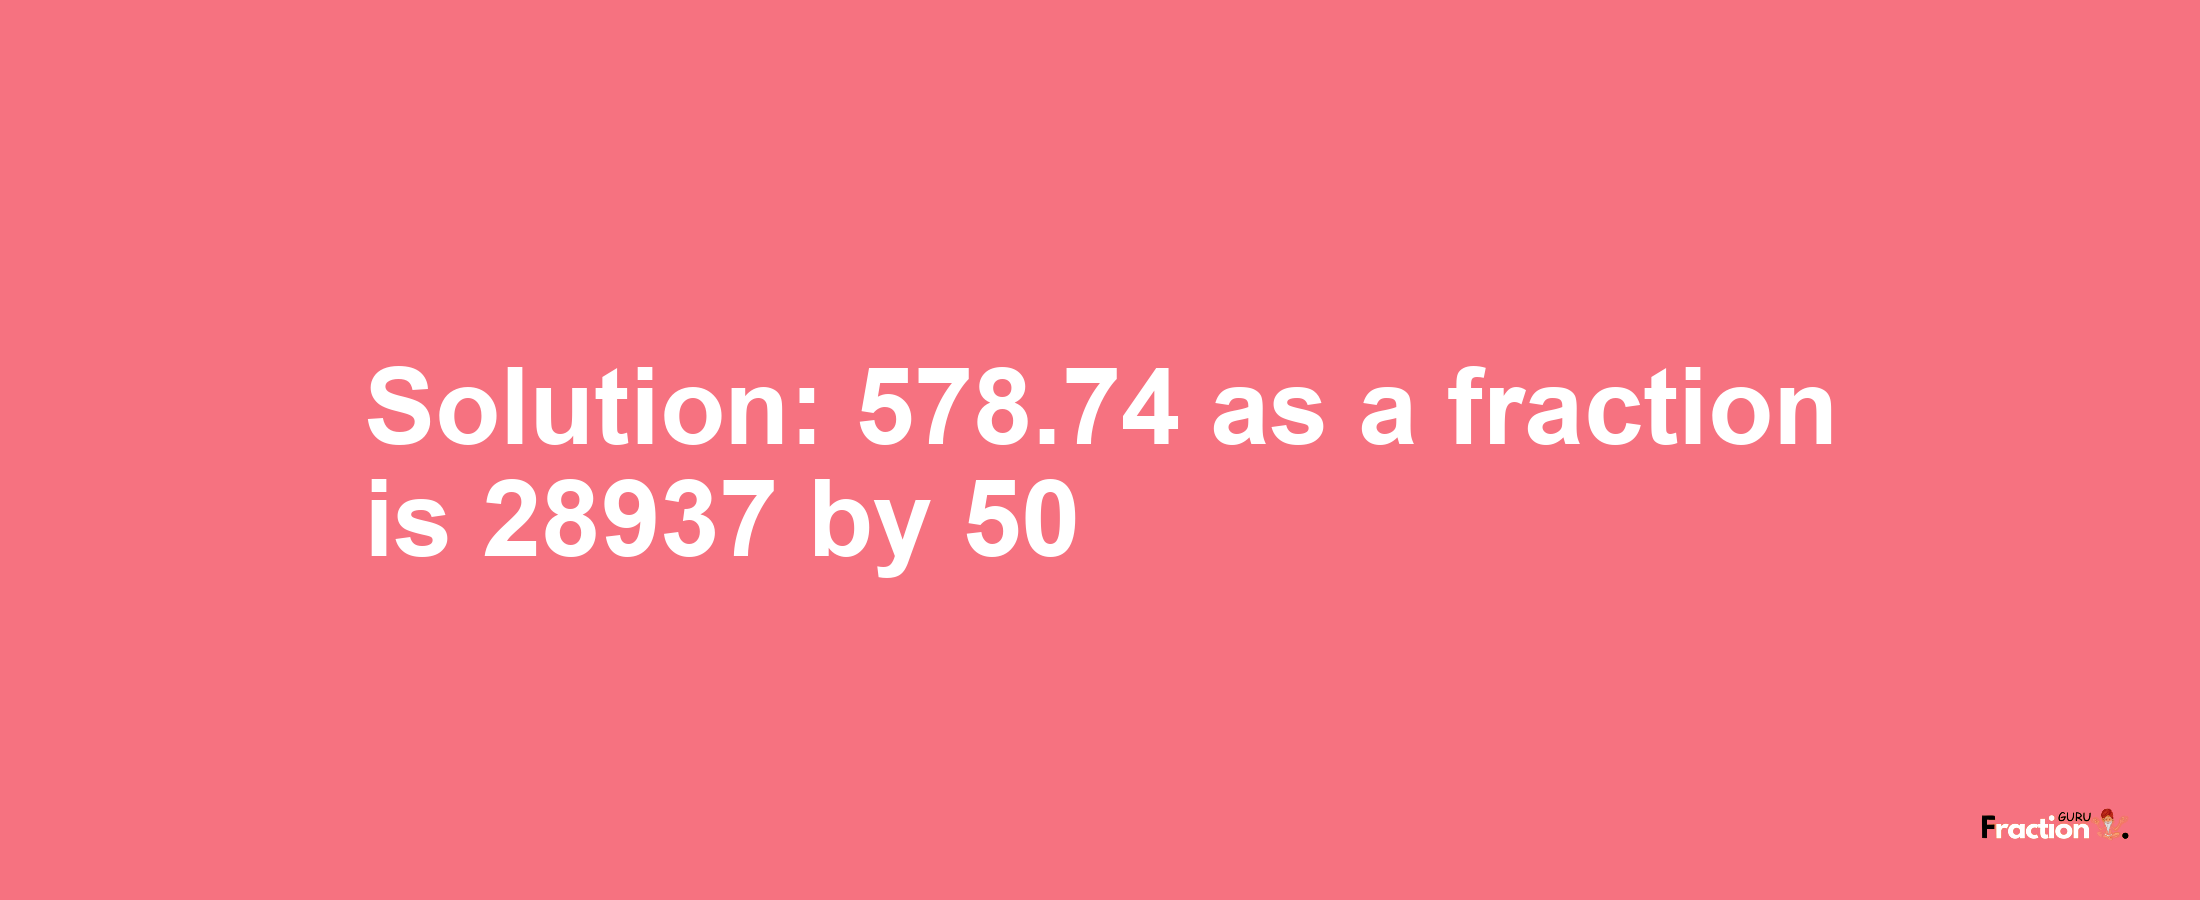 Solution:578.74 as a fraction is 28937/50